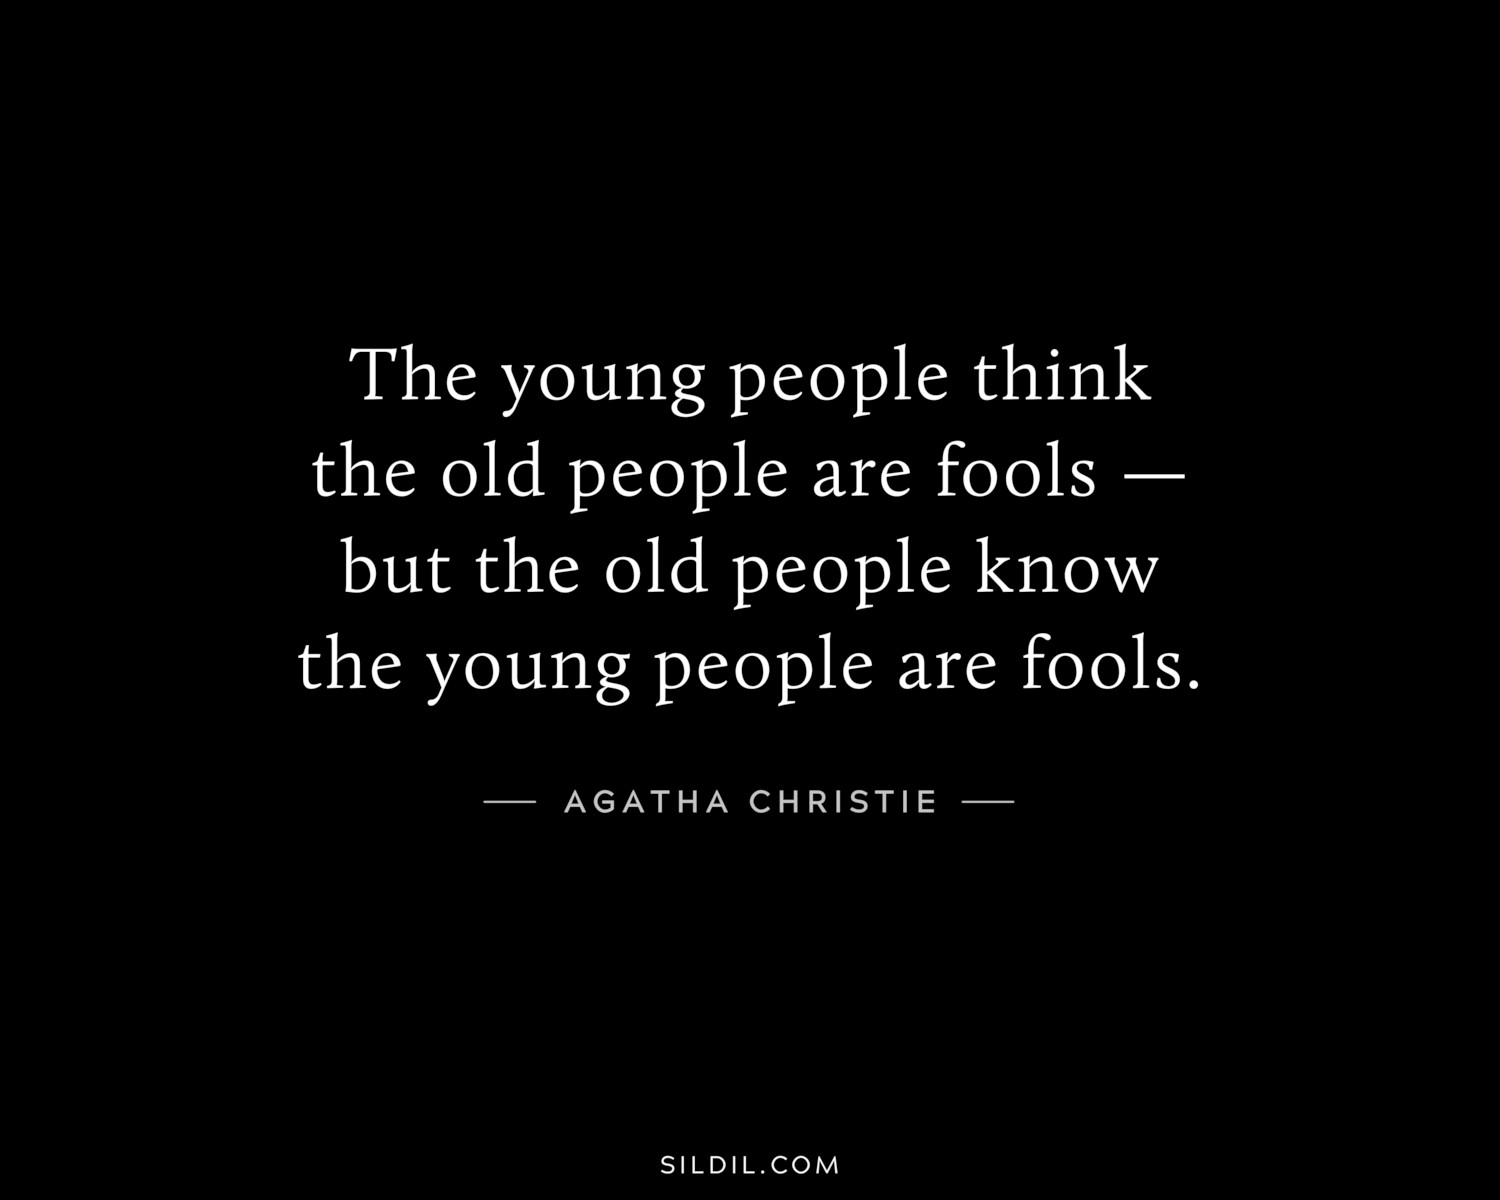 The young people think the old people are fools — but the old people know the young people are fools.